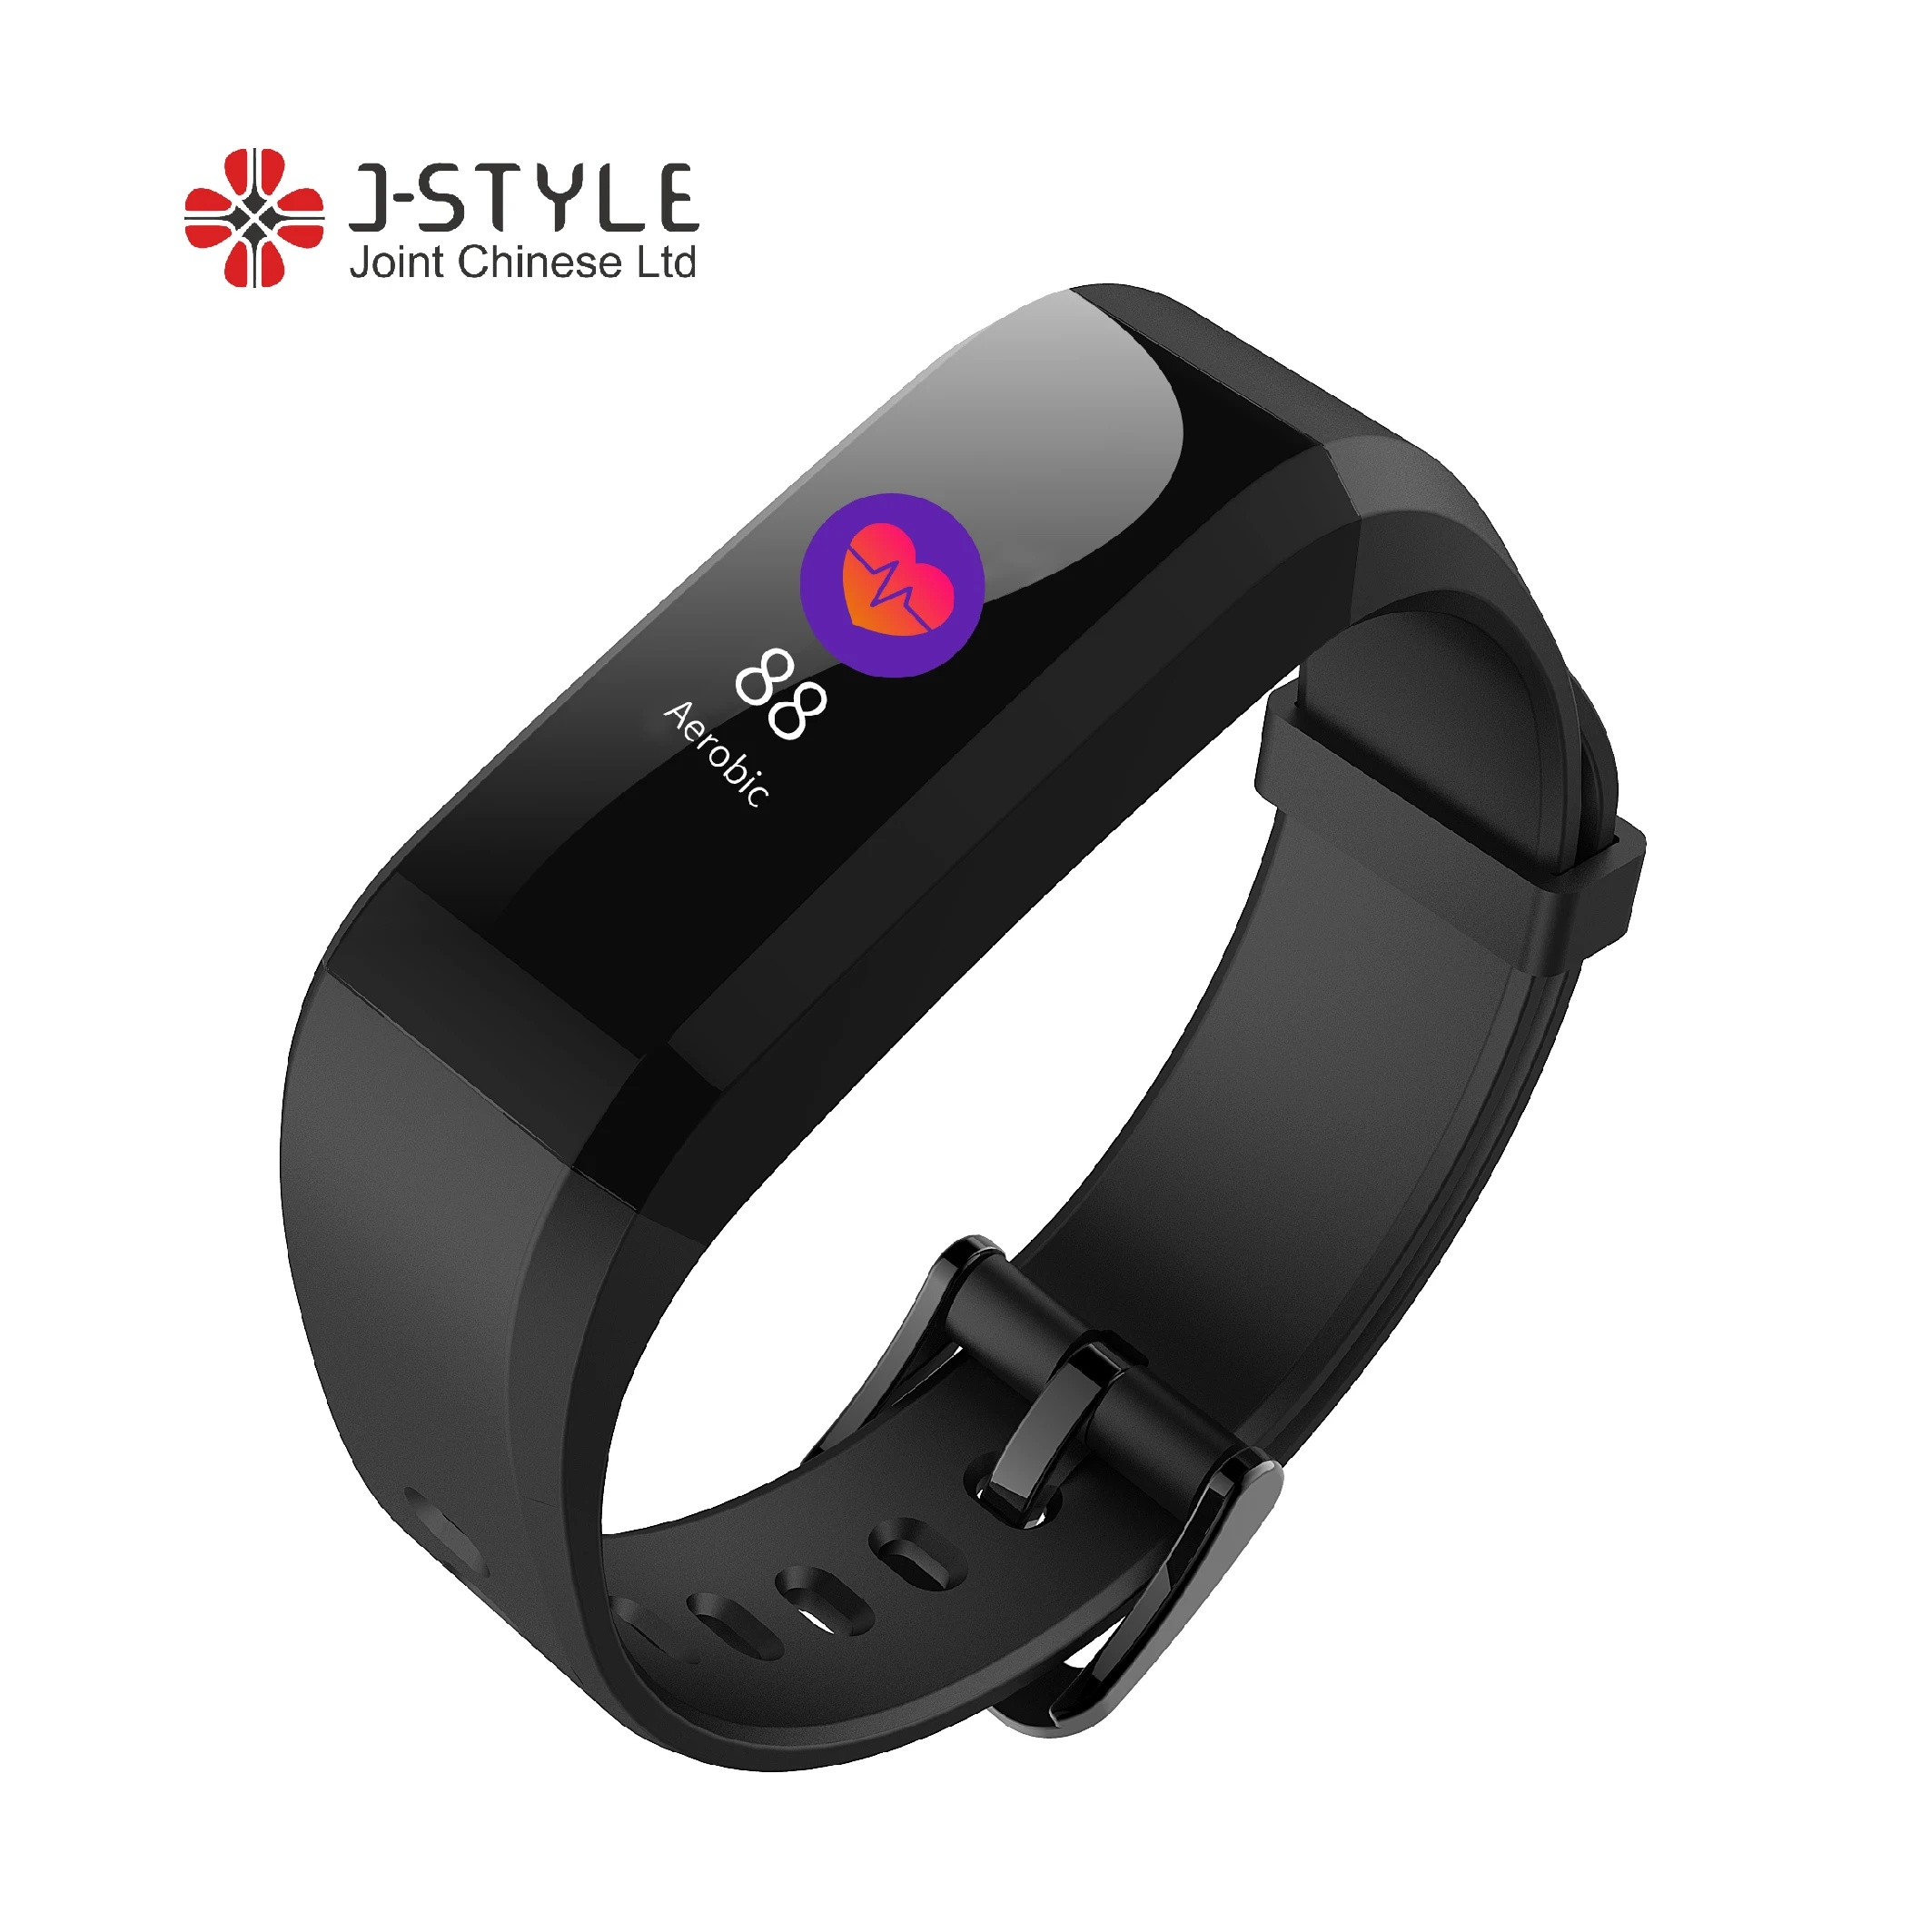 

J-Style 1810 cheap heart rate smart bracelet steps calories counter sport pedometer, auto sleep tracking, Black, red, slate, or oem color